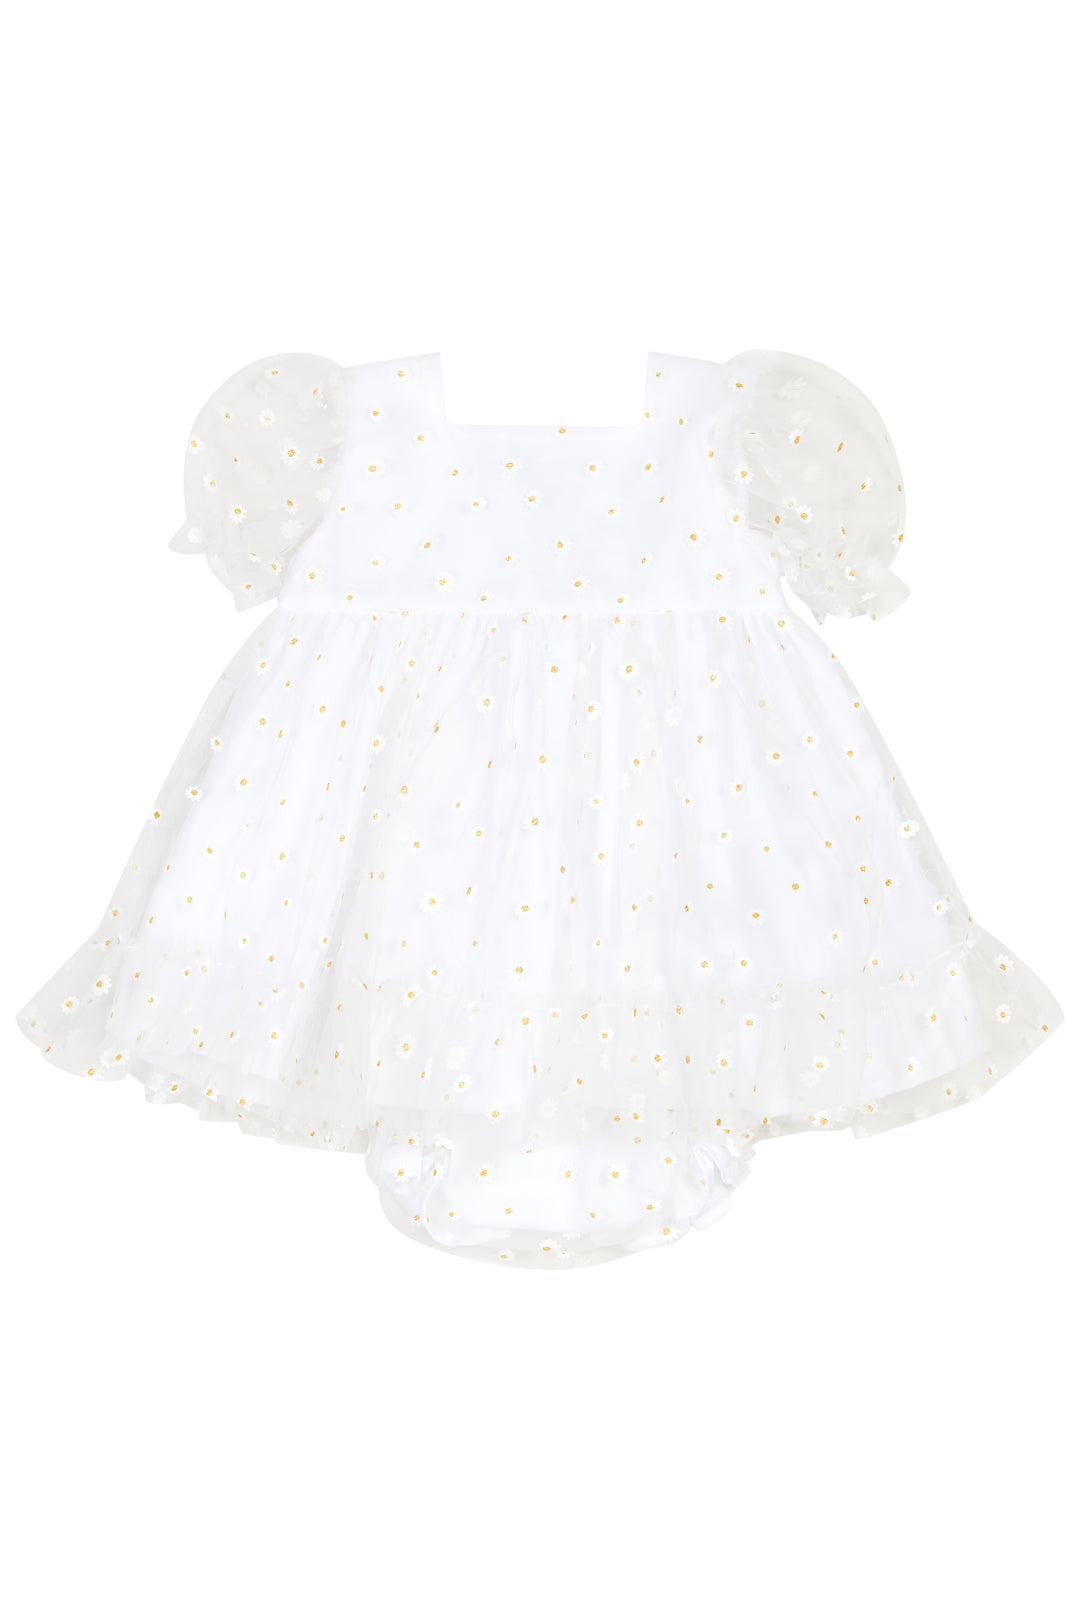 Chic by Deolinda PREORDER "Flora" White Tulle Daisy Print Dress & Bloomers | Millie and John